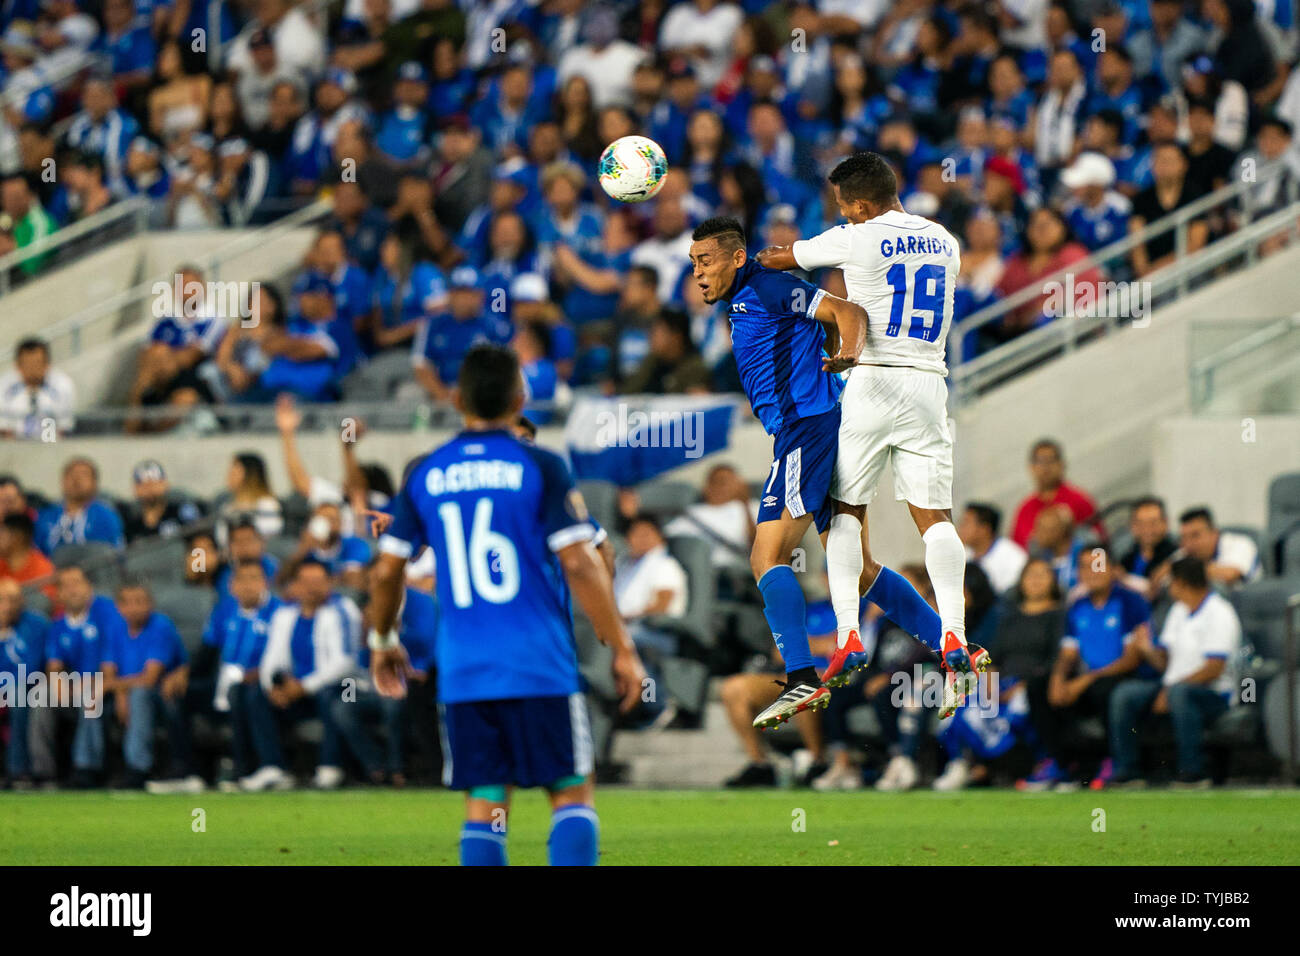 Los Angeles, USA. 25th June, 2019. Luis Garrido (R) of Honduras vies with Bryan Tamacas of El Salvador during the Group C match between Honduras and El Salvador at the 2019 CONCACAF Gold Cup in Los Angeles, June 25, 2019. Honduras won 4-0. Credit: Qian Weizhong/Xinhua/Alamy Live News Stock Photo